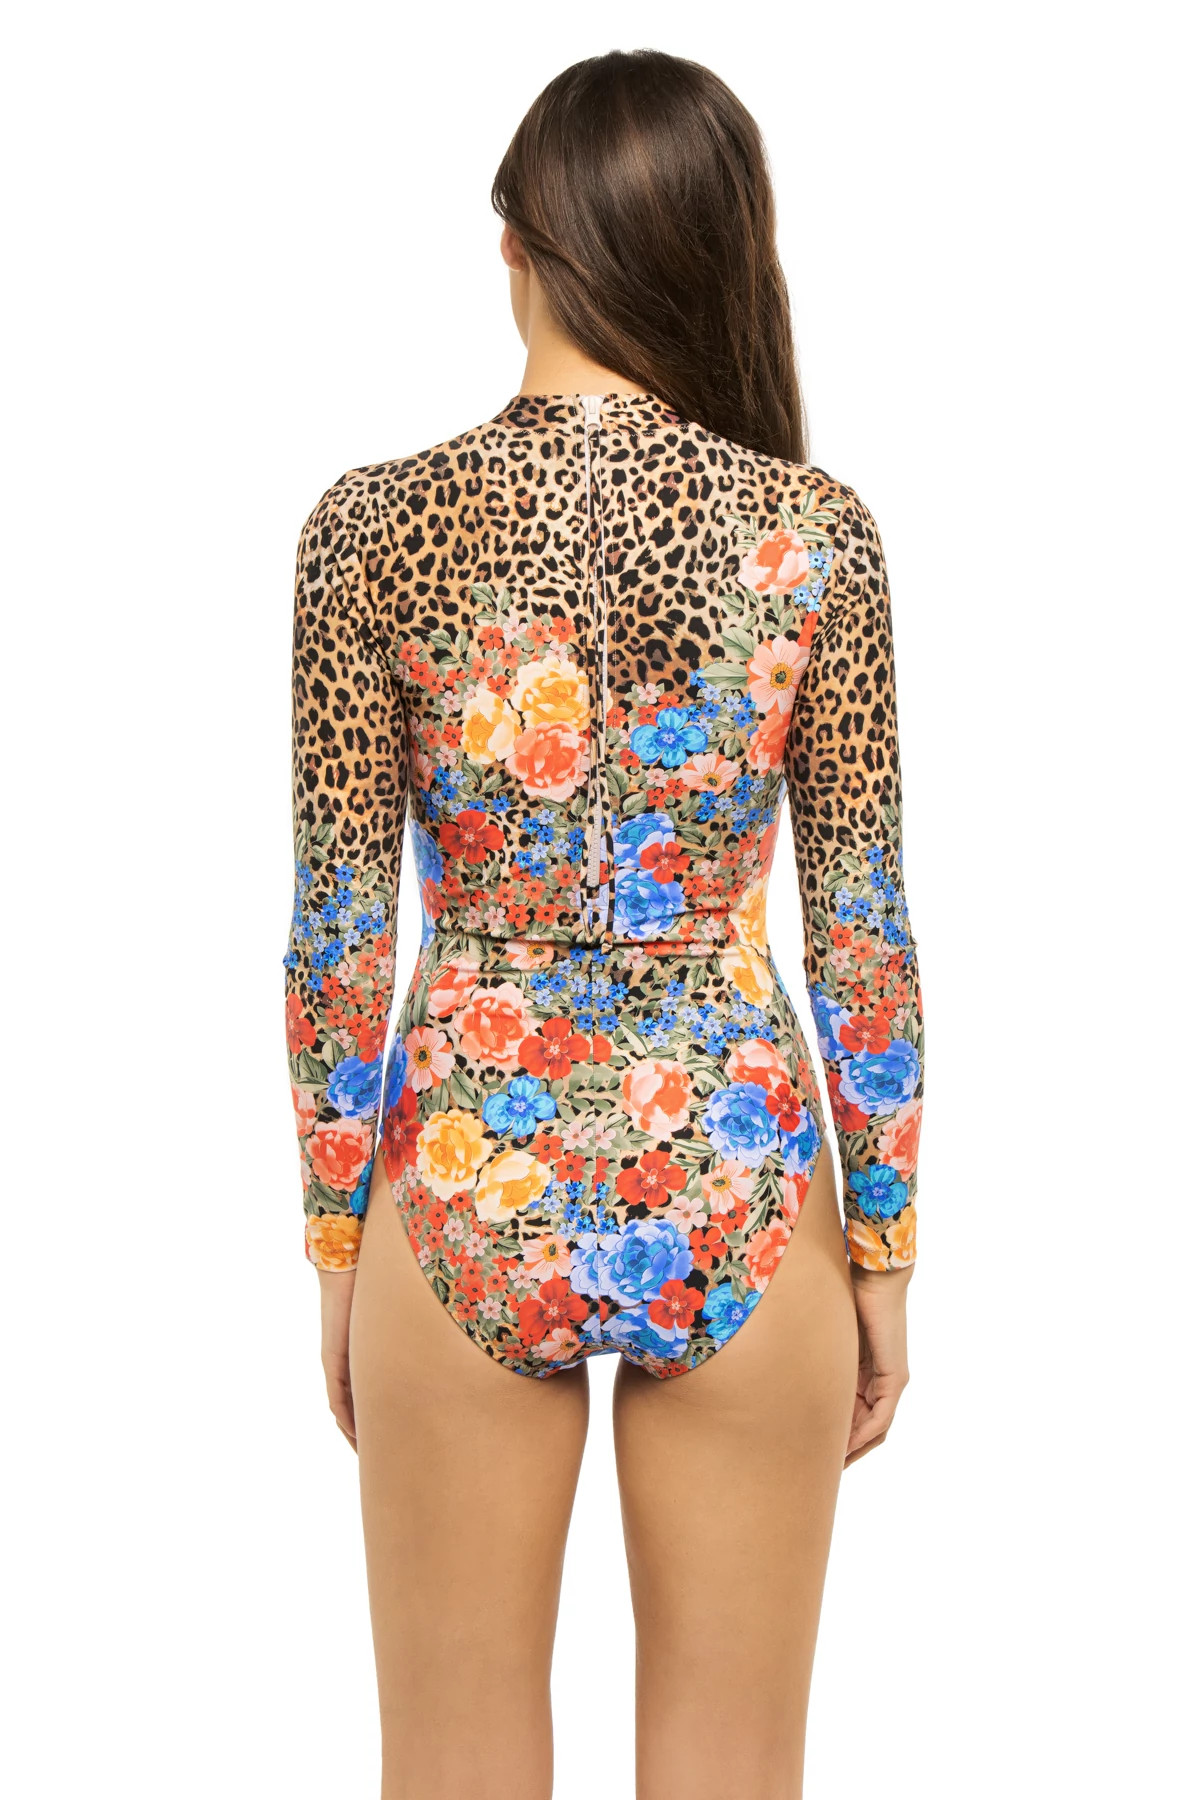 MULTI Cheetah Long Sleeve One Piece Swimsuit image number 2